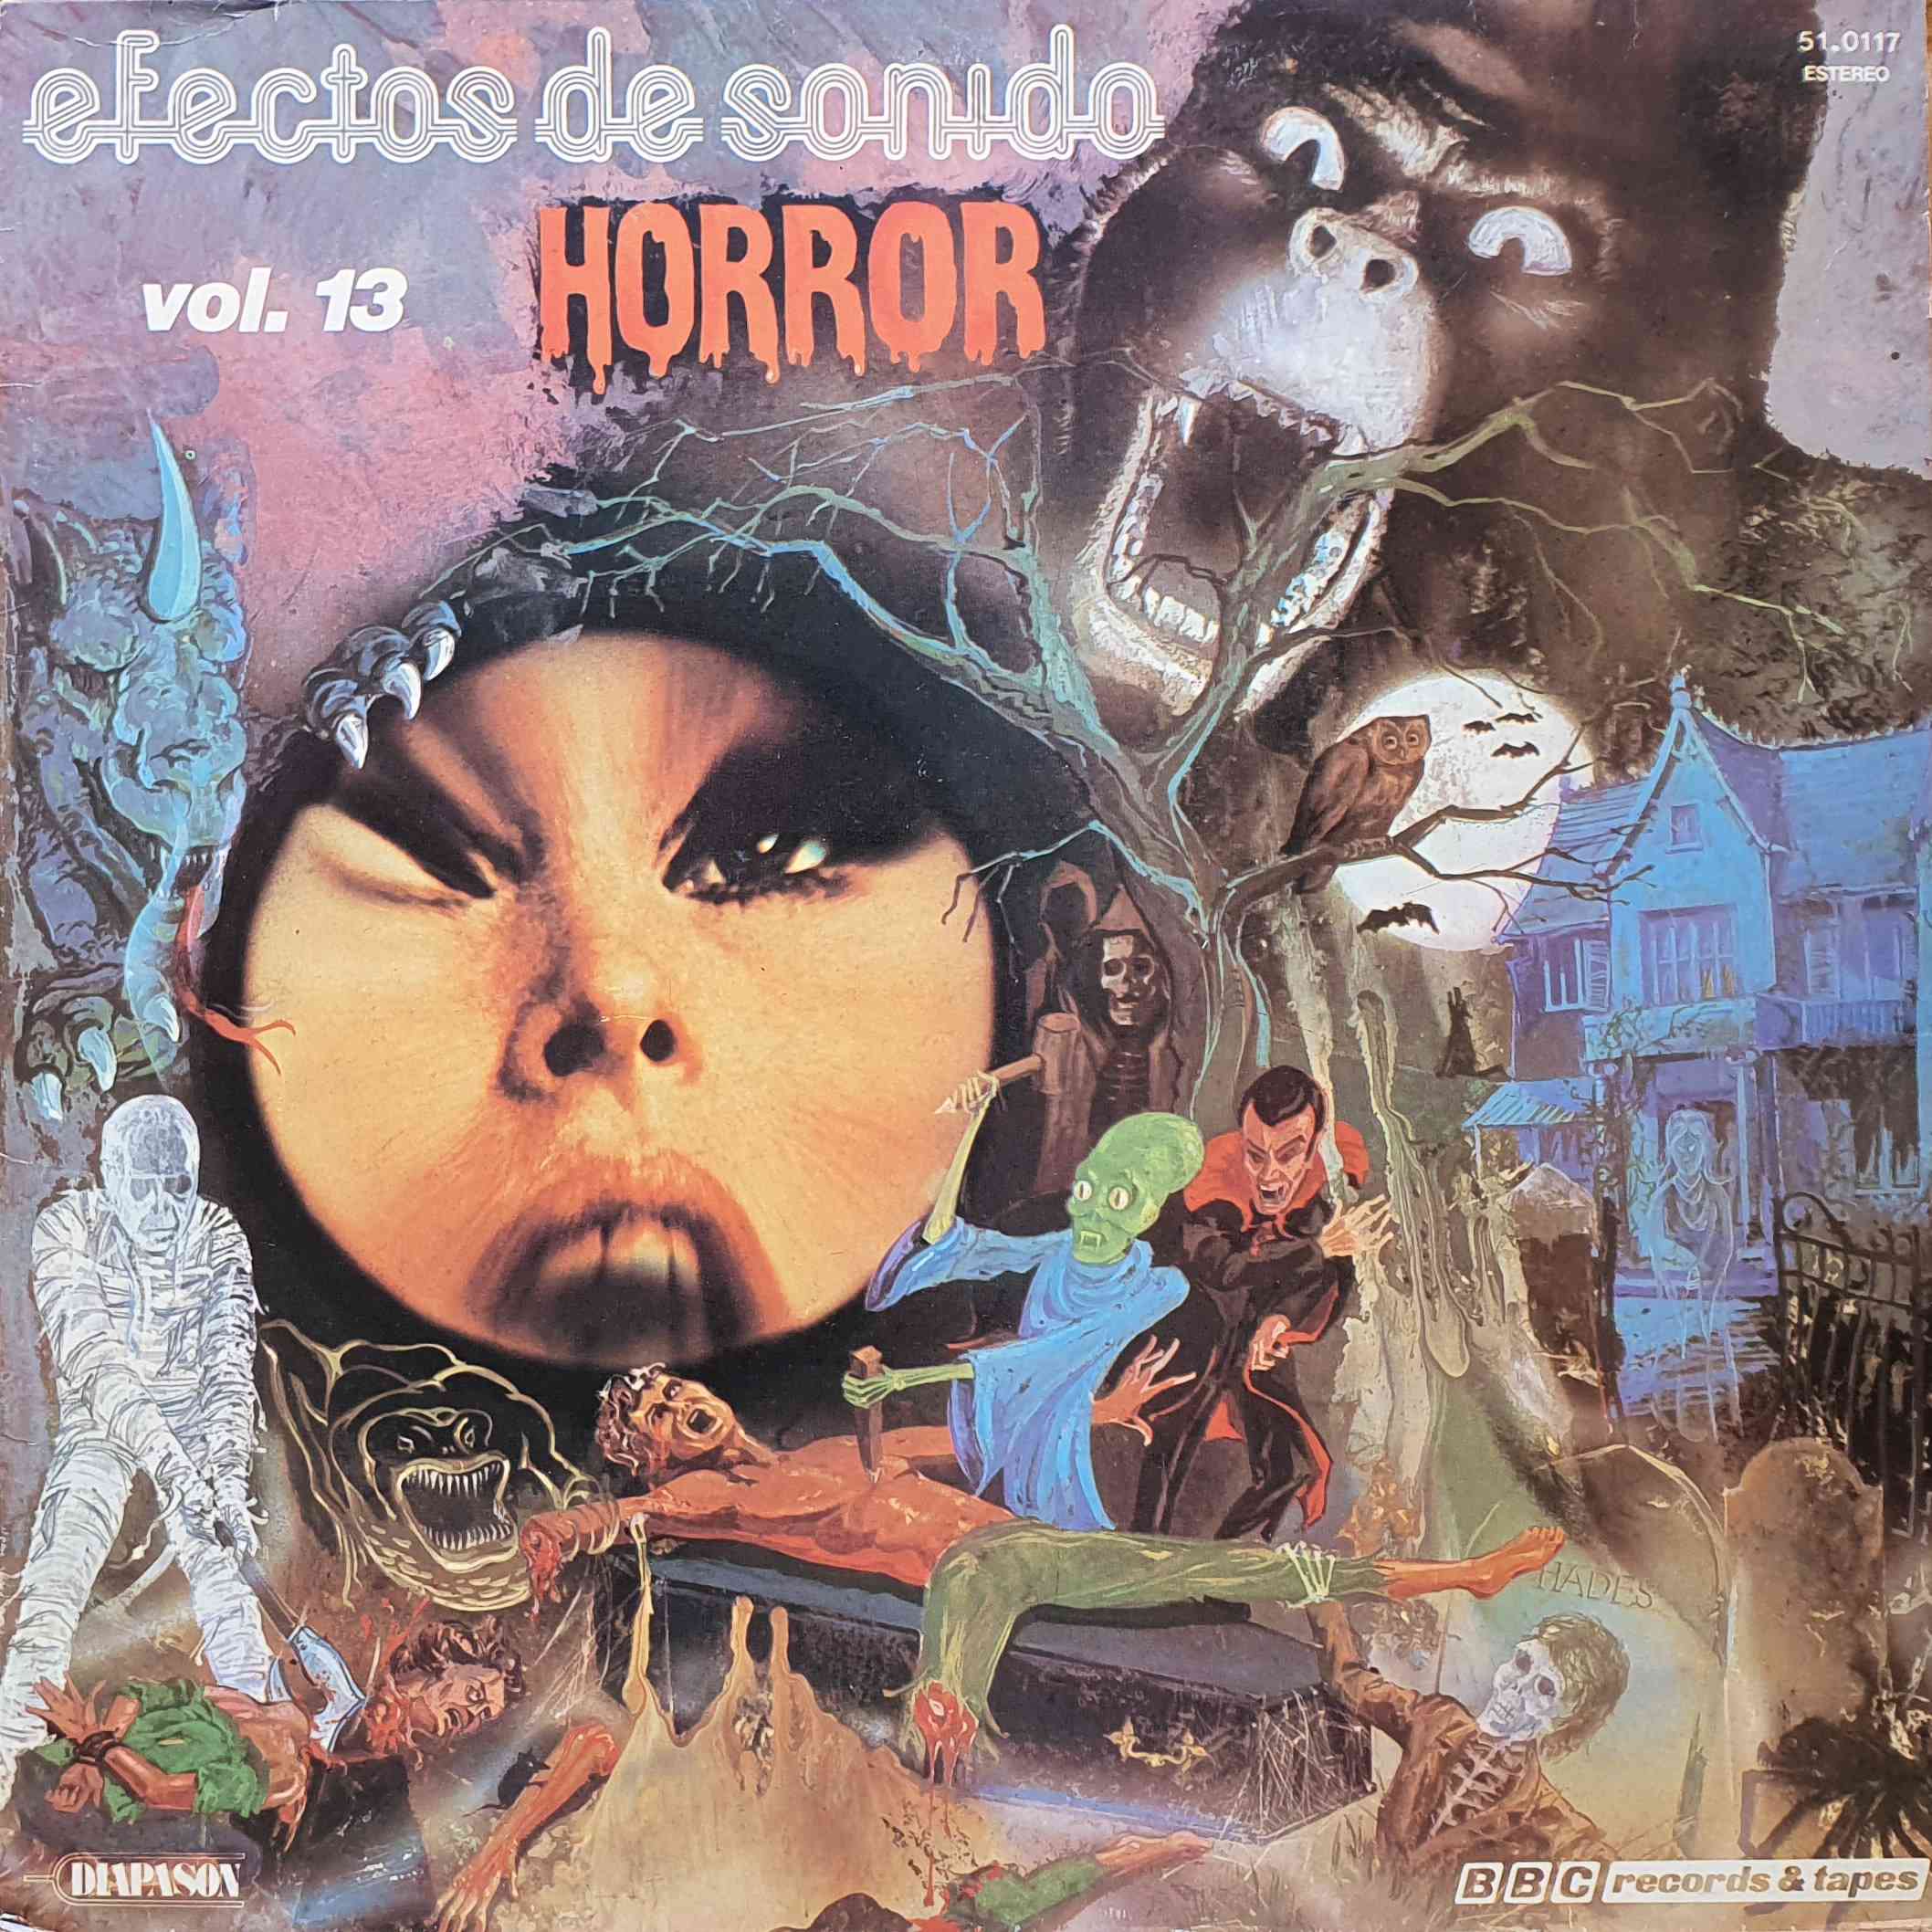 Picture of 51.0117 Efectos De Sonido Vol.13 Horror (Spanish import) by artist Various from the BBC albums - Records and Tapes library